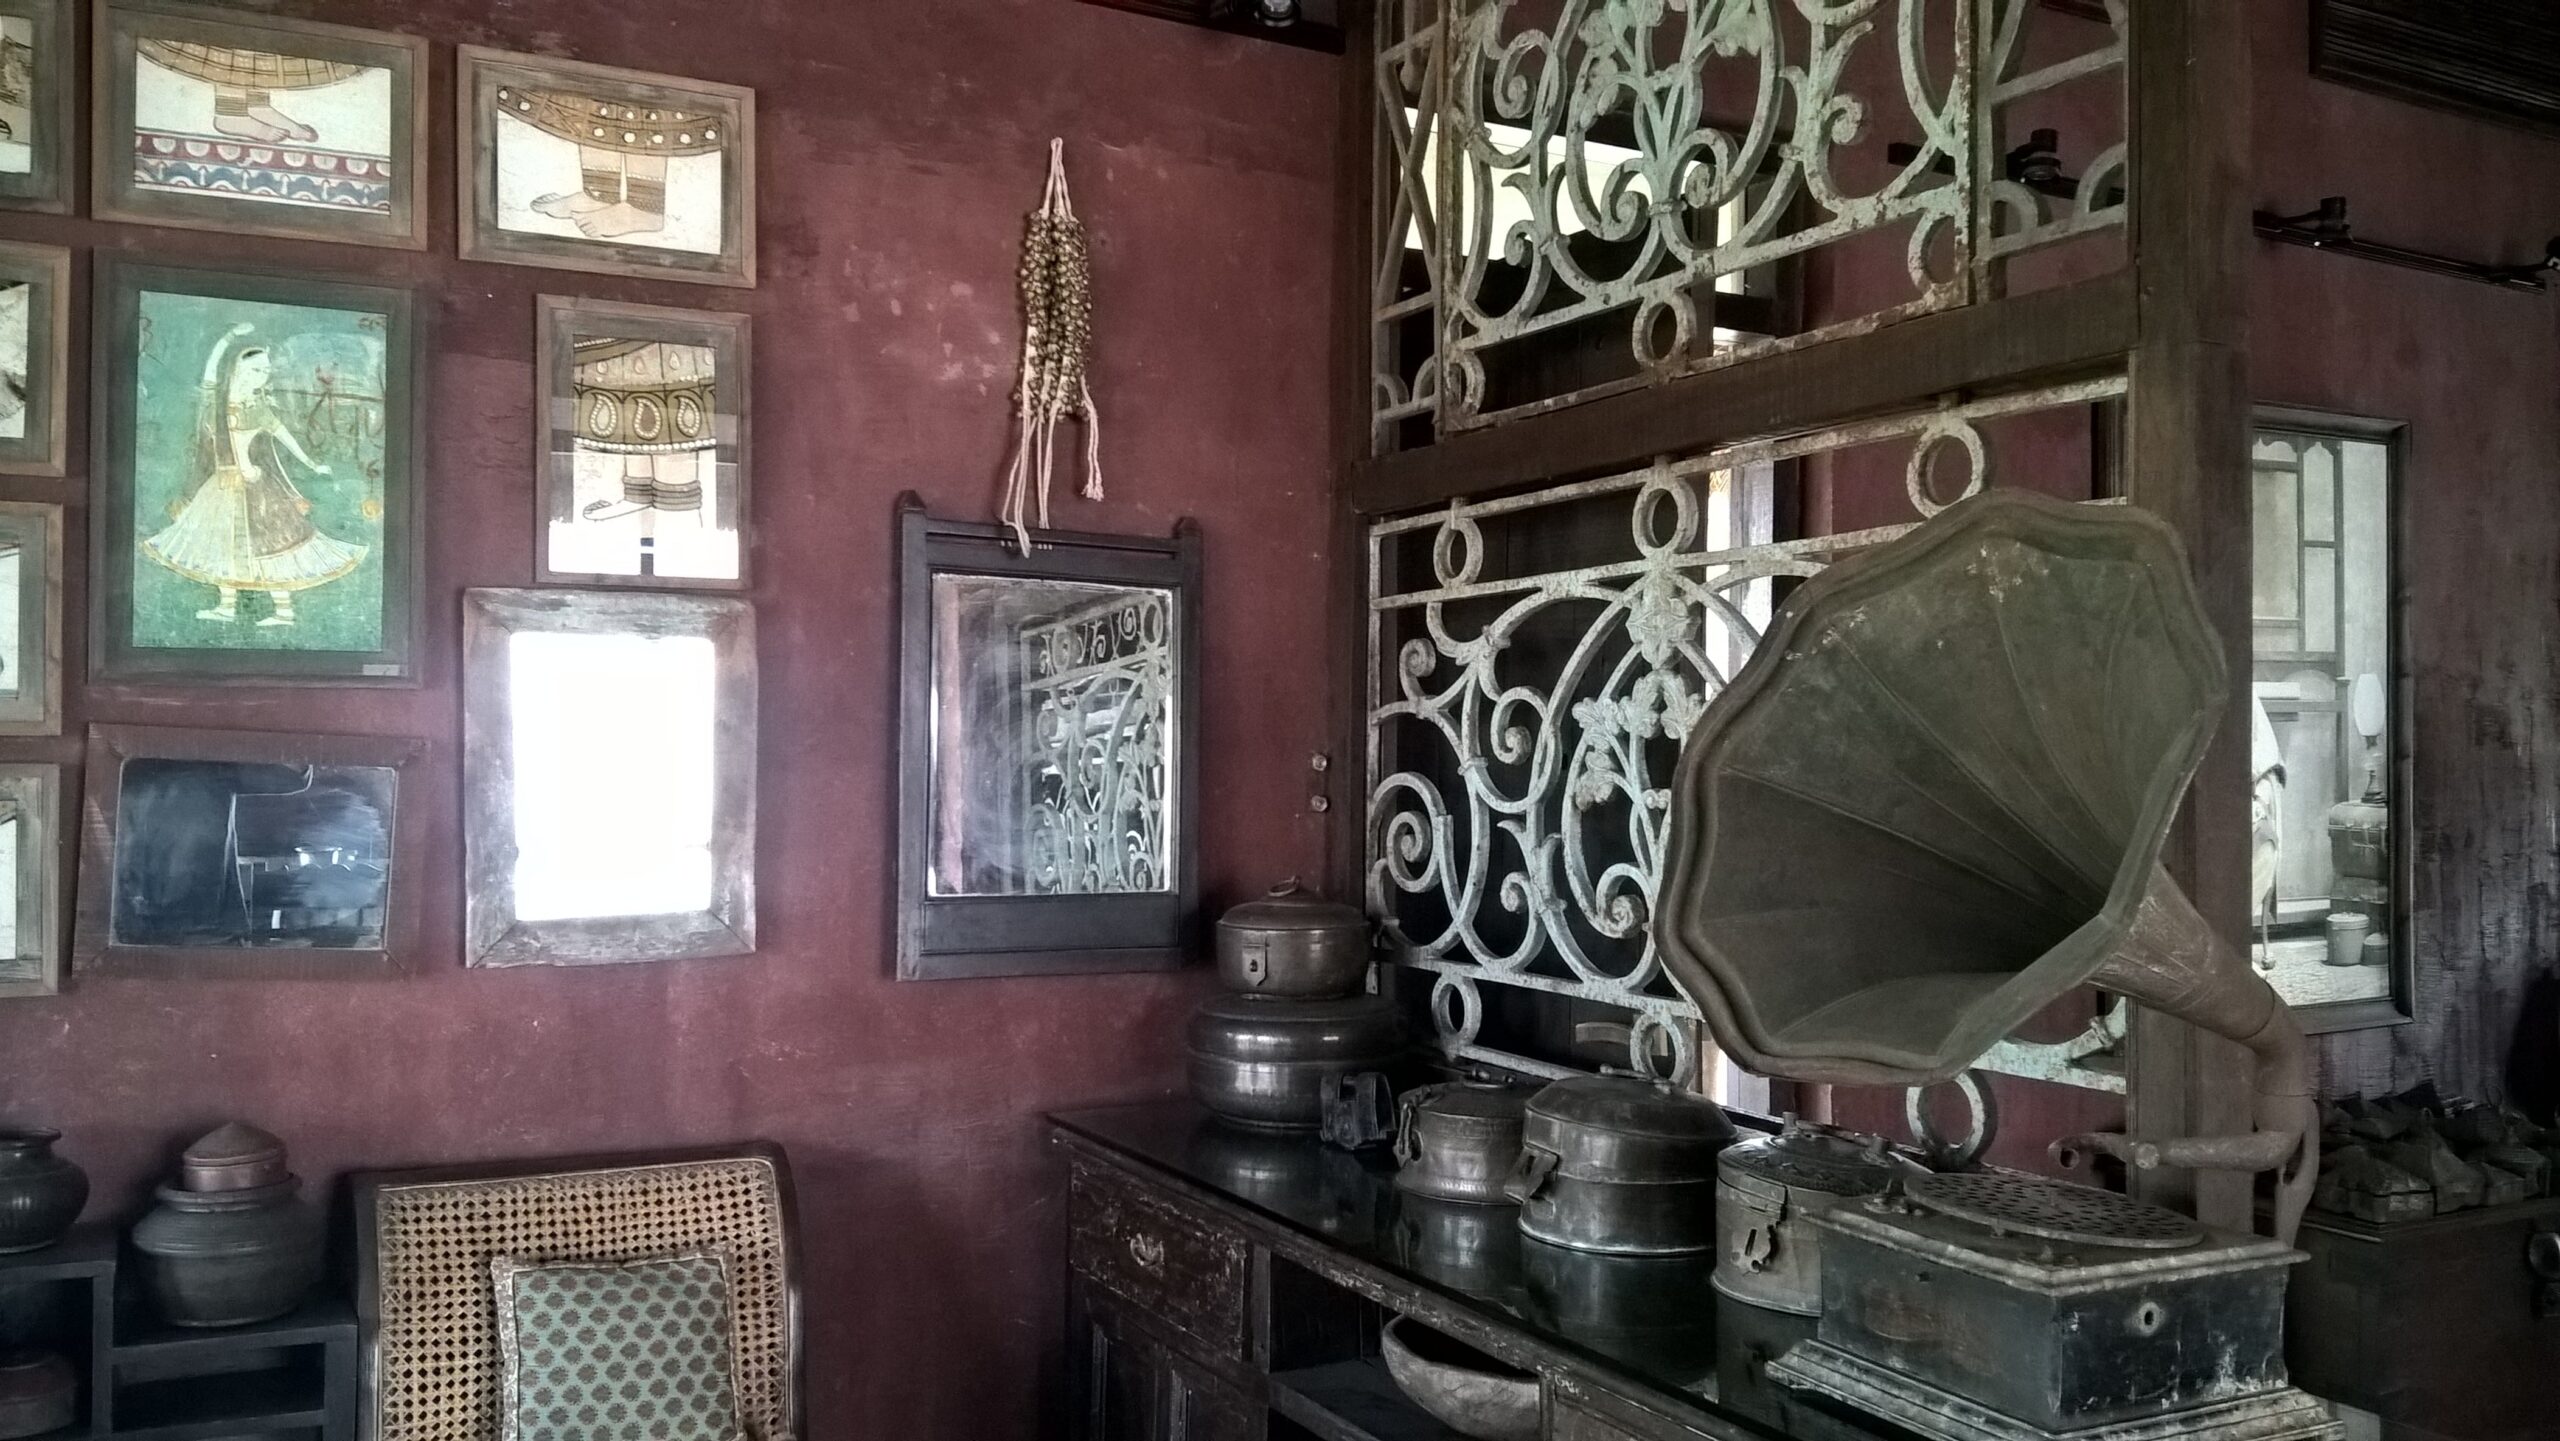 Collection of Antiques displayed at various places